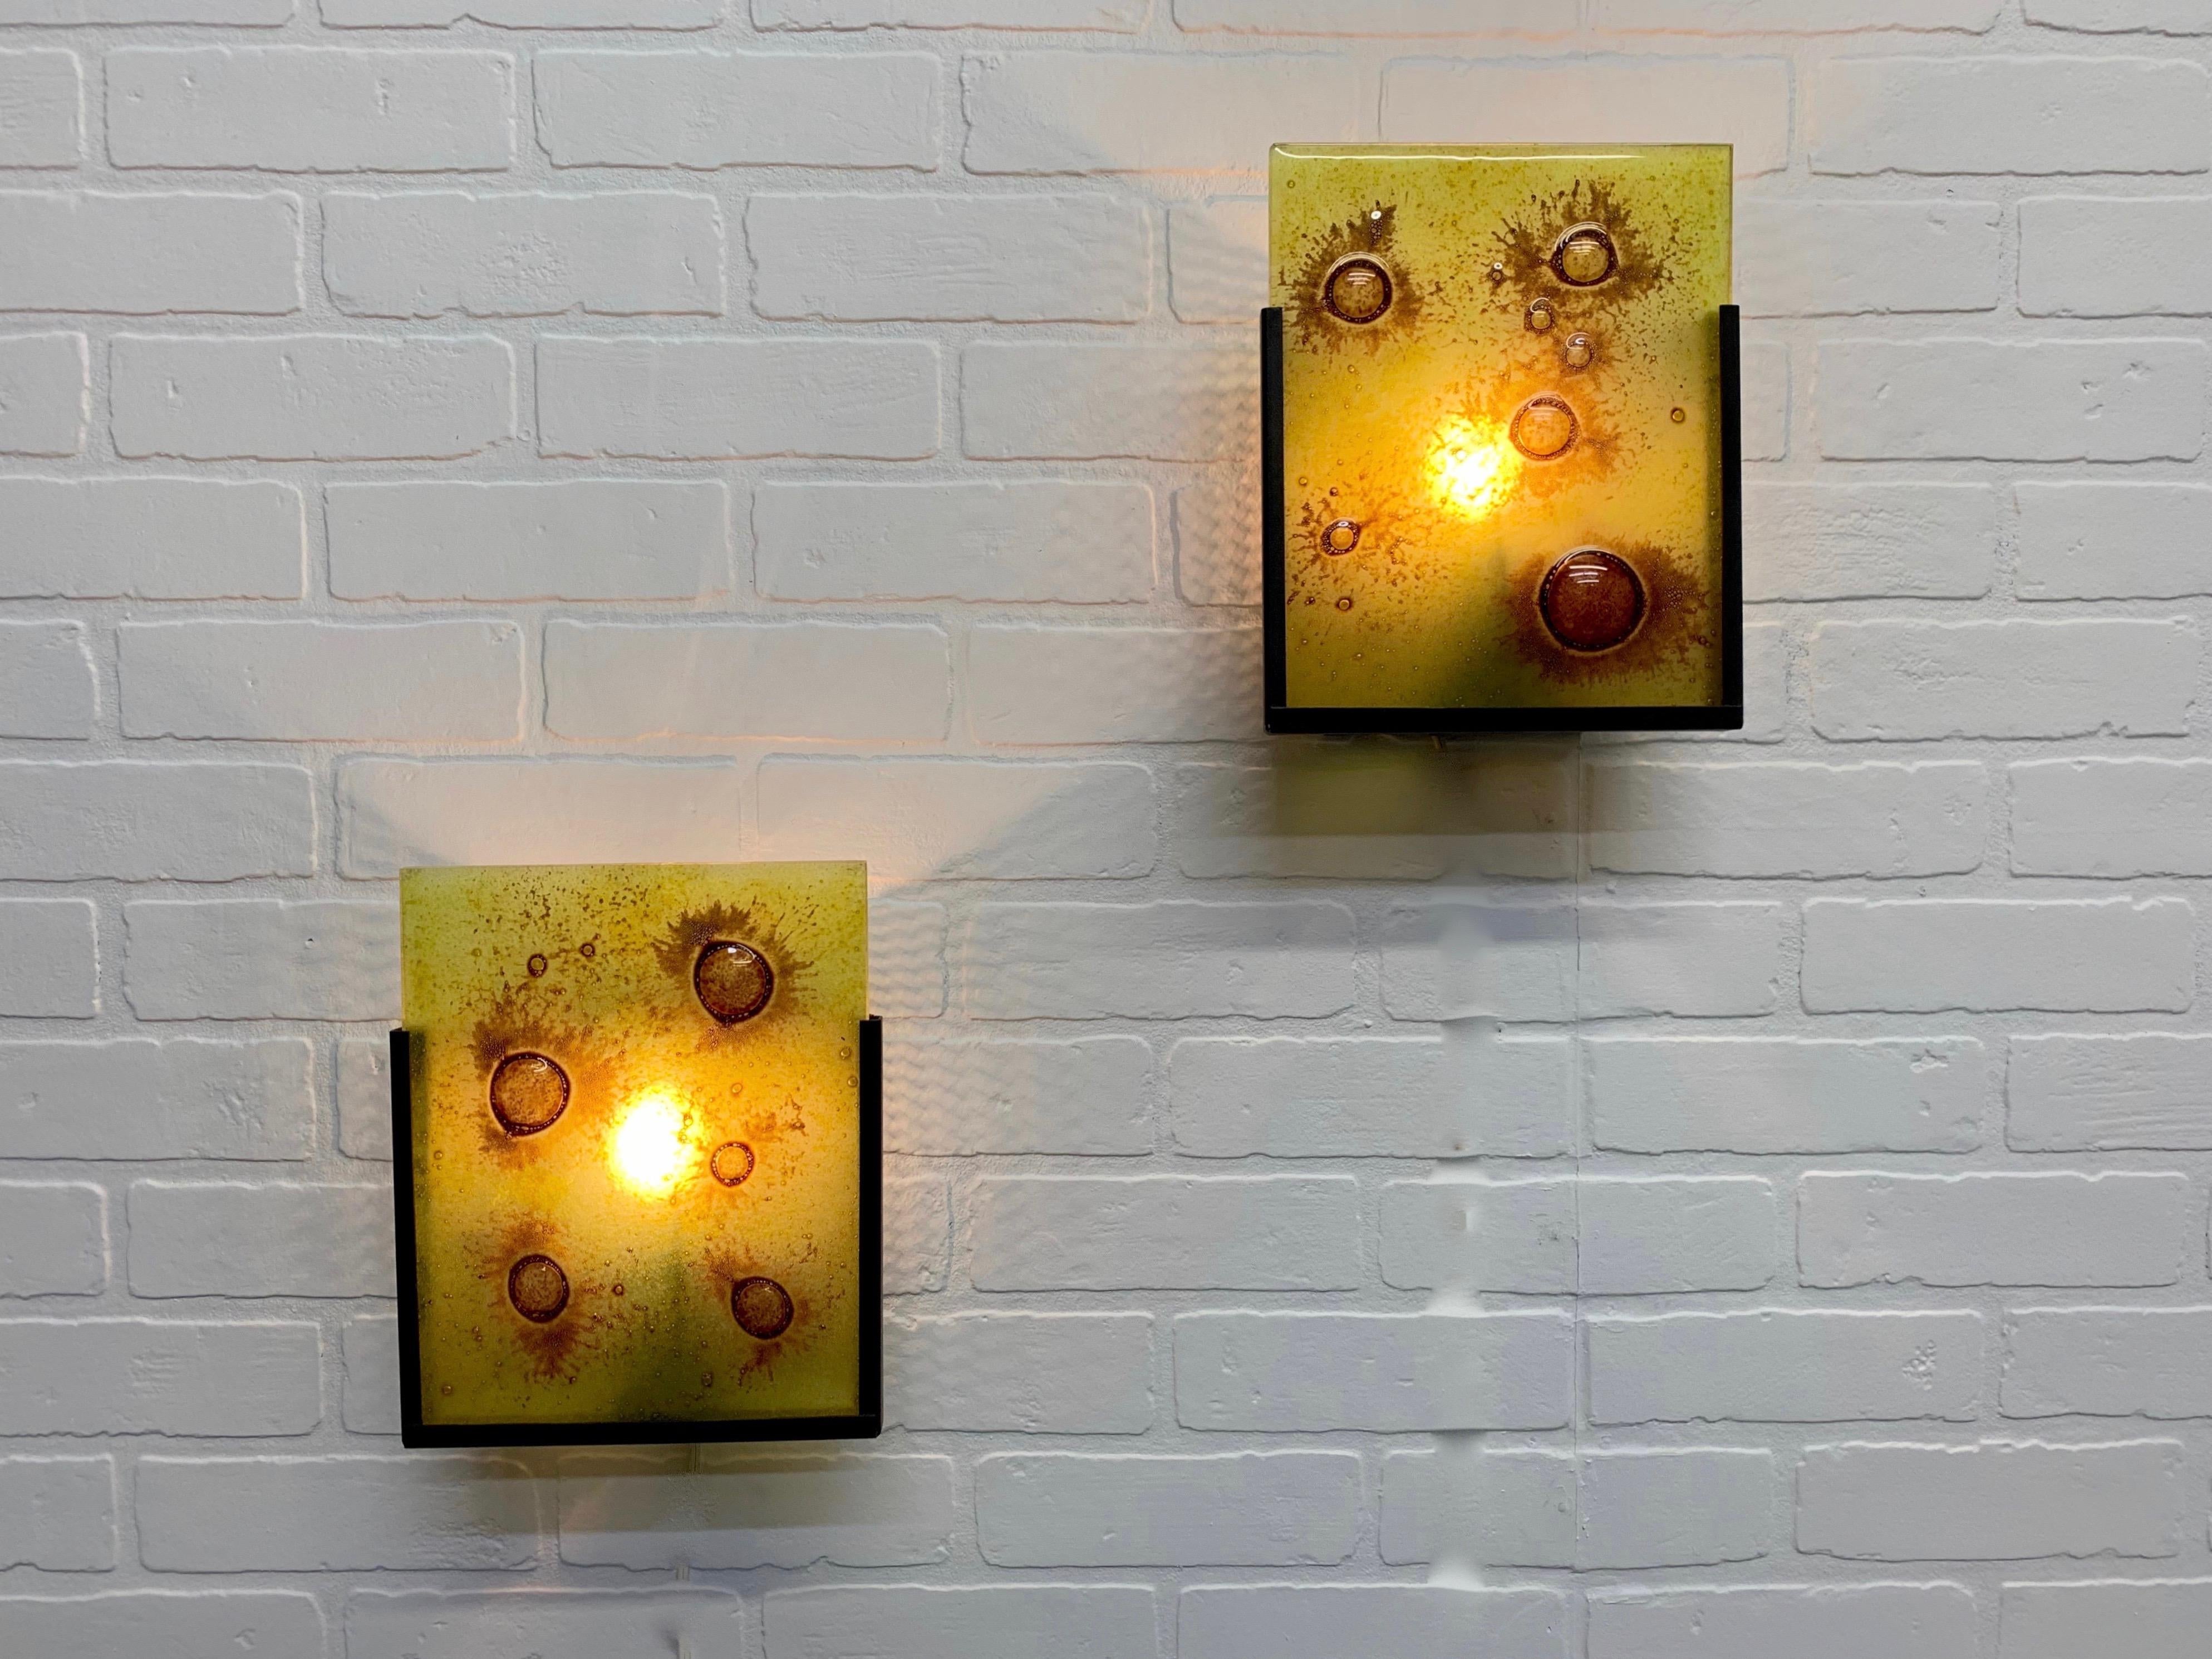 Pair of bronze powder-coated perforated wall mount with art glass panel that slips into the front and illuminated from the rear by single light bulb.